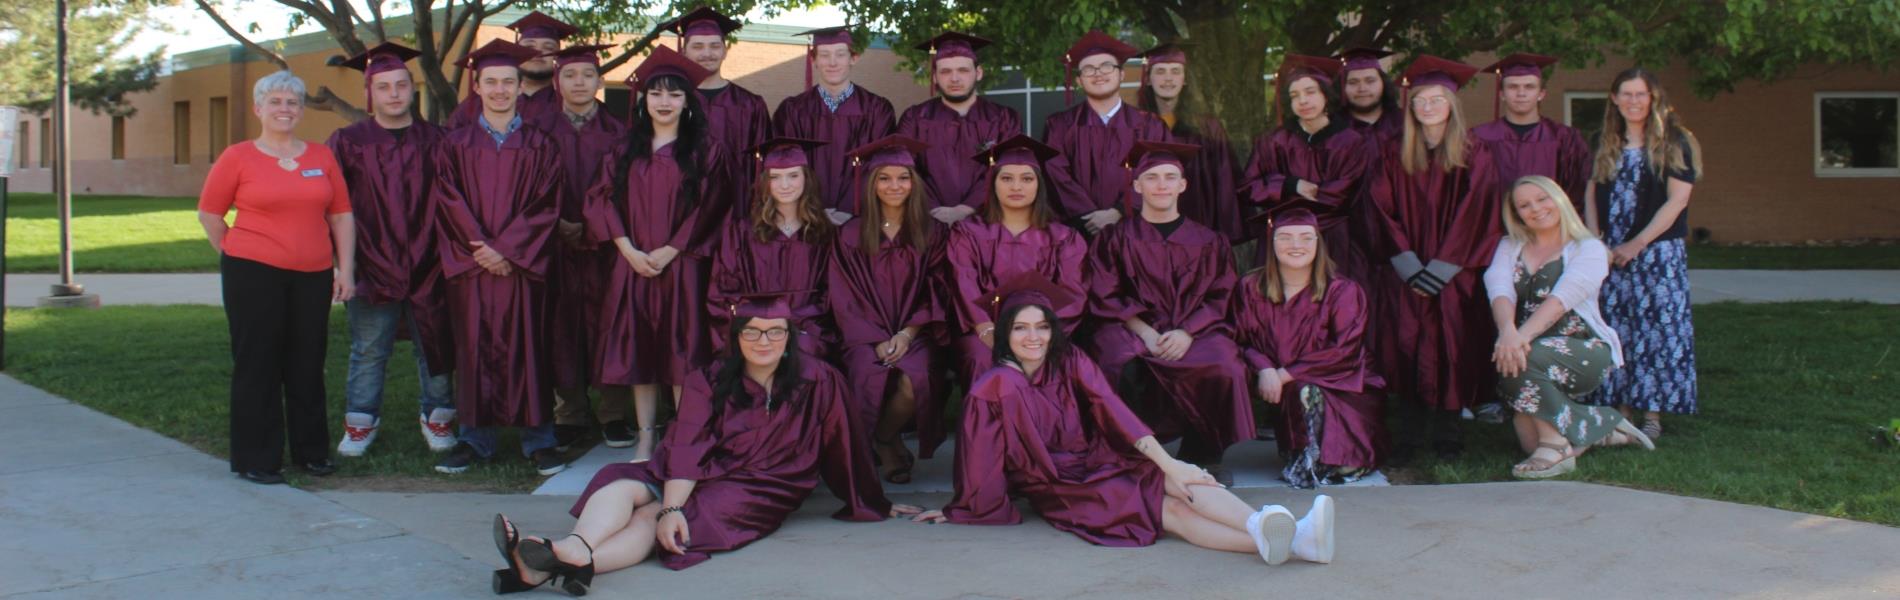 Twenty-One Graduates in Maroon Caps and Gowns pose by a bench in three rows one row standing, one row sitting on a bench, two girls on the ground reclining. They are flanked by three teachers. They are posed under multiple trees in front of a light colored brick high school building.